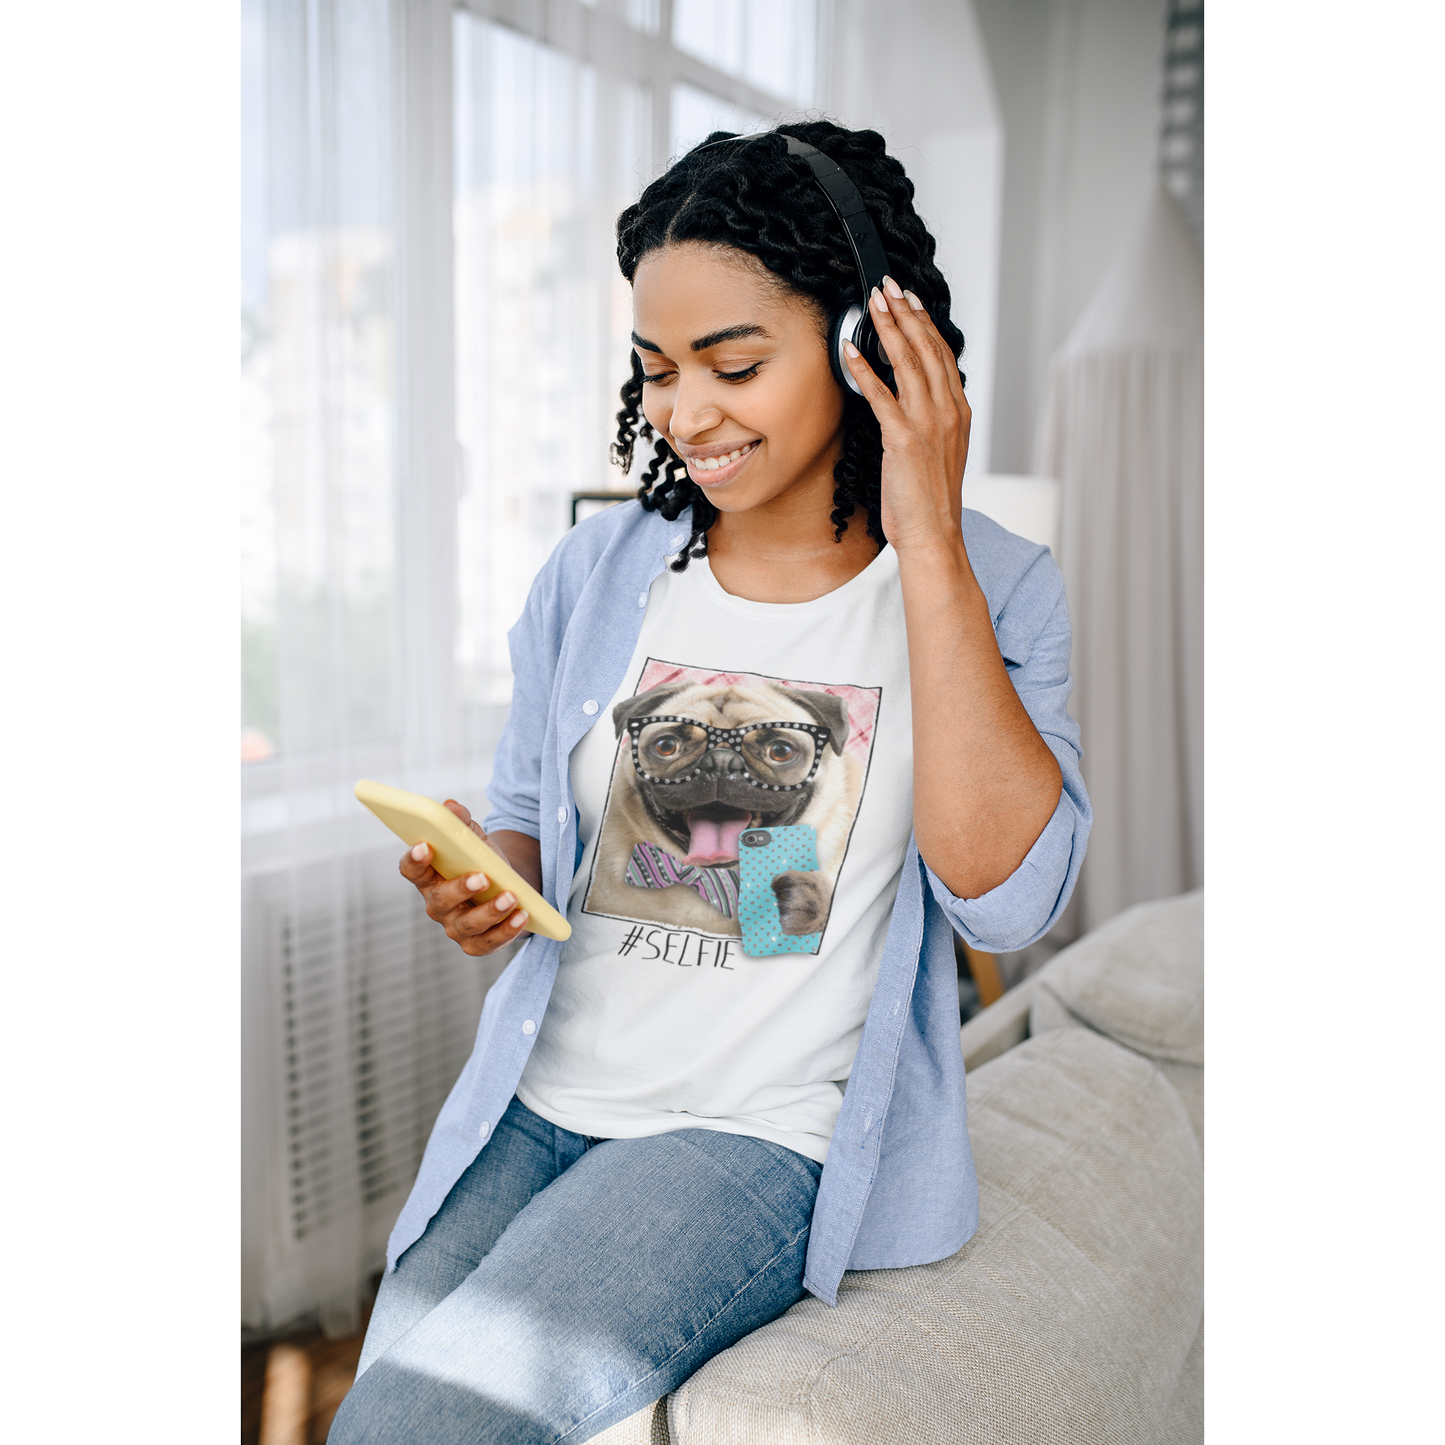 Girl with a Pug wearing eyeglasses with Rhinestones, in a "Selfie."